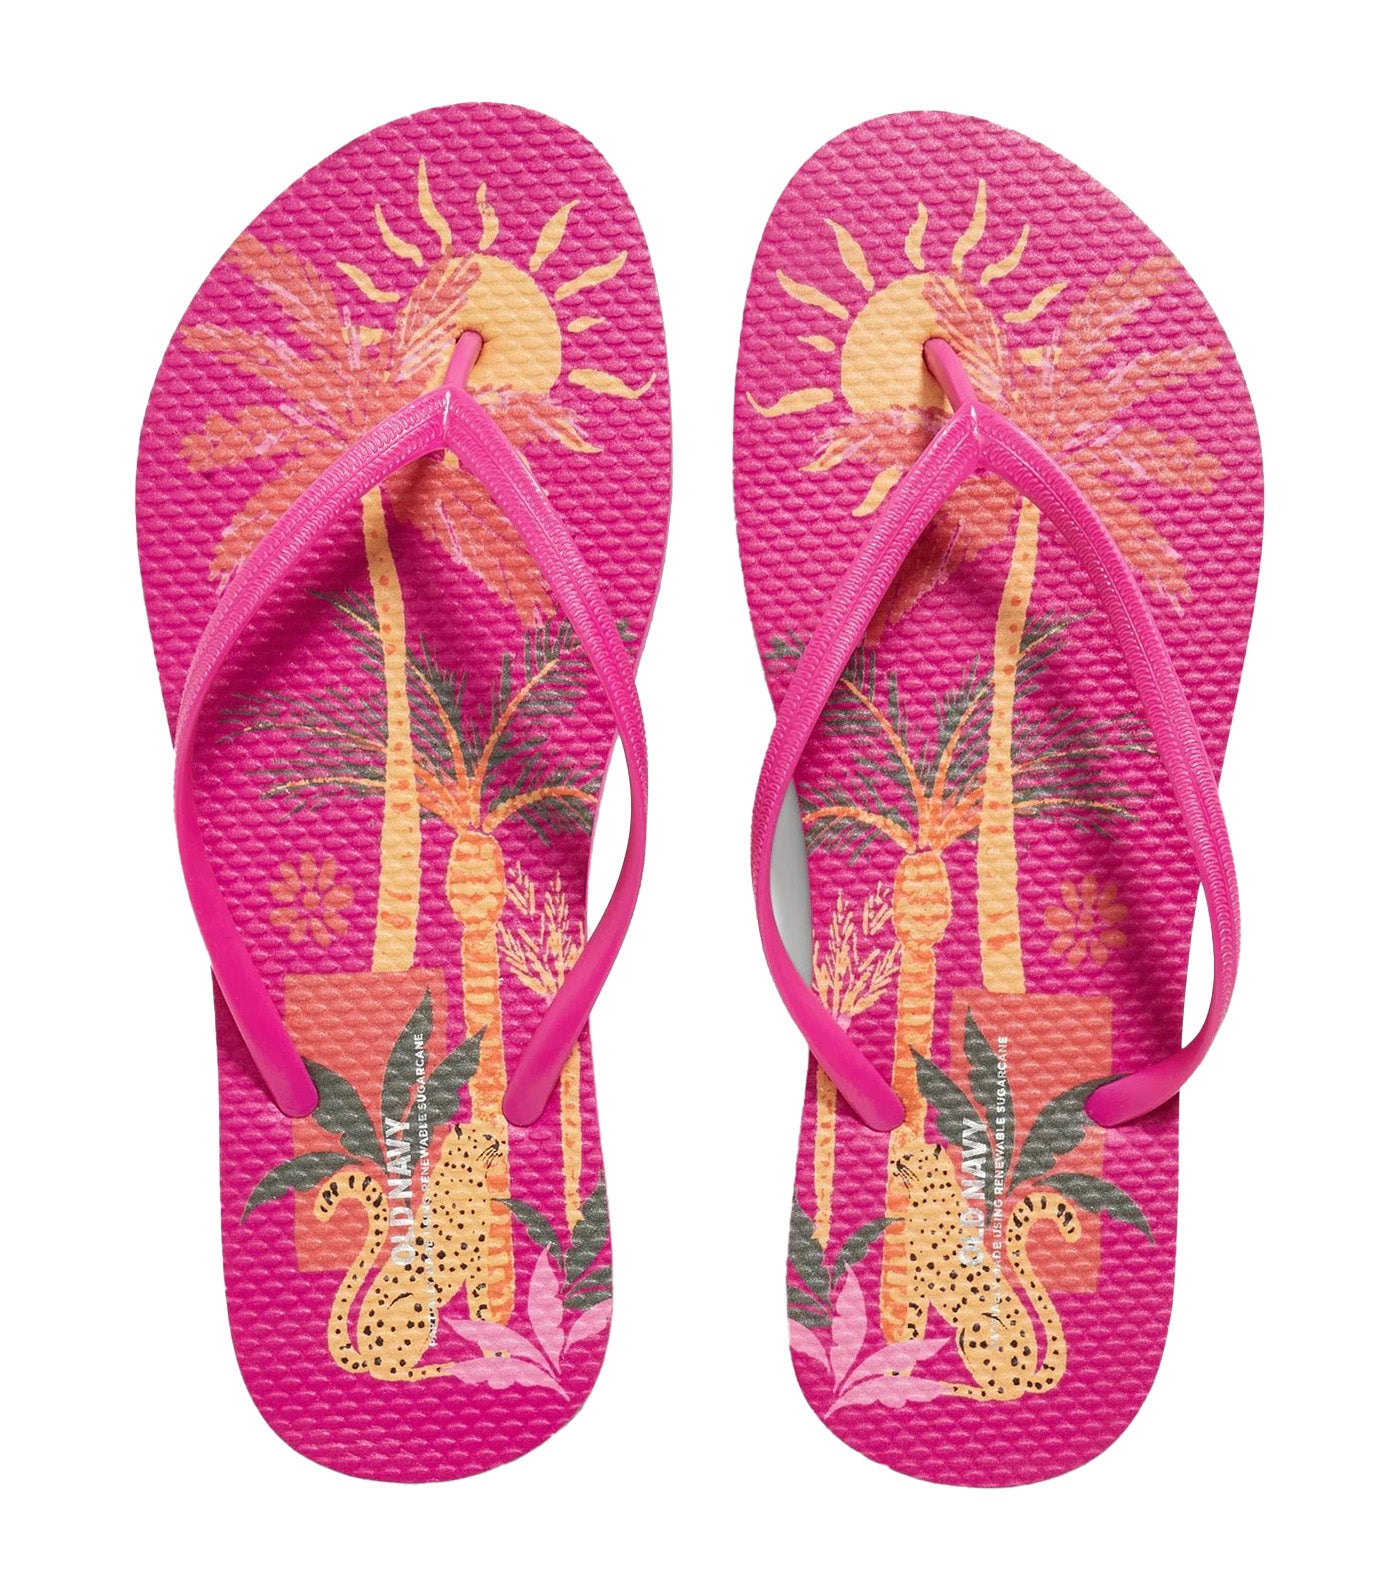 Patterned Flip-Flop Sandals for Women (Partially Plant-Based) Wild Pink Cheetah